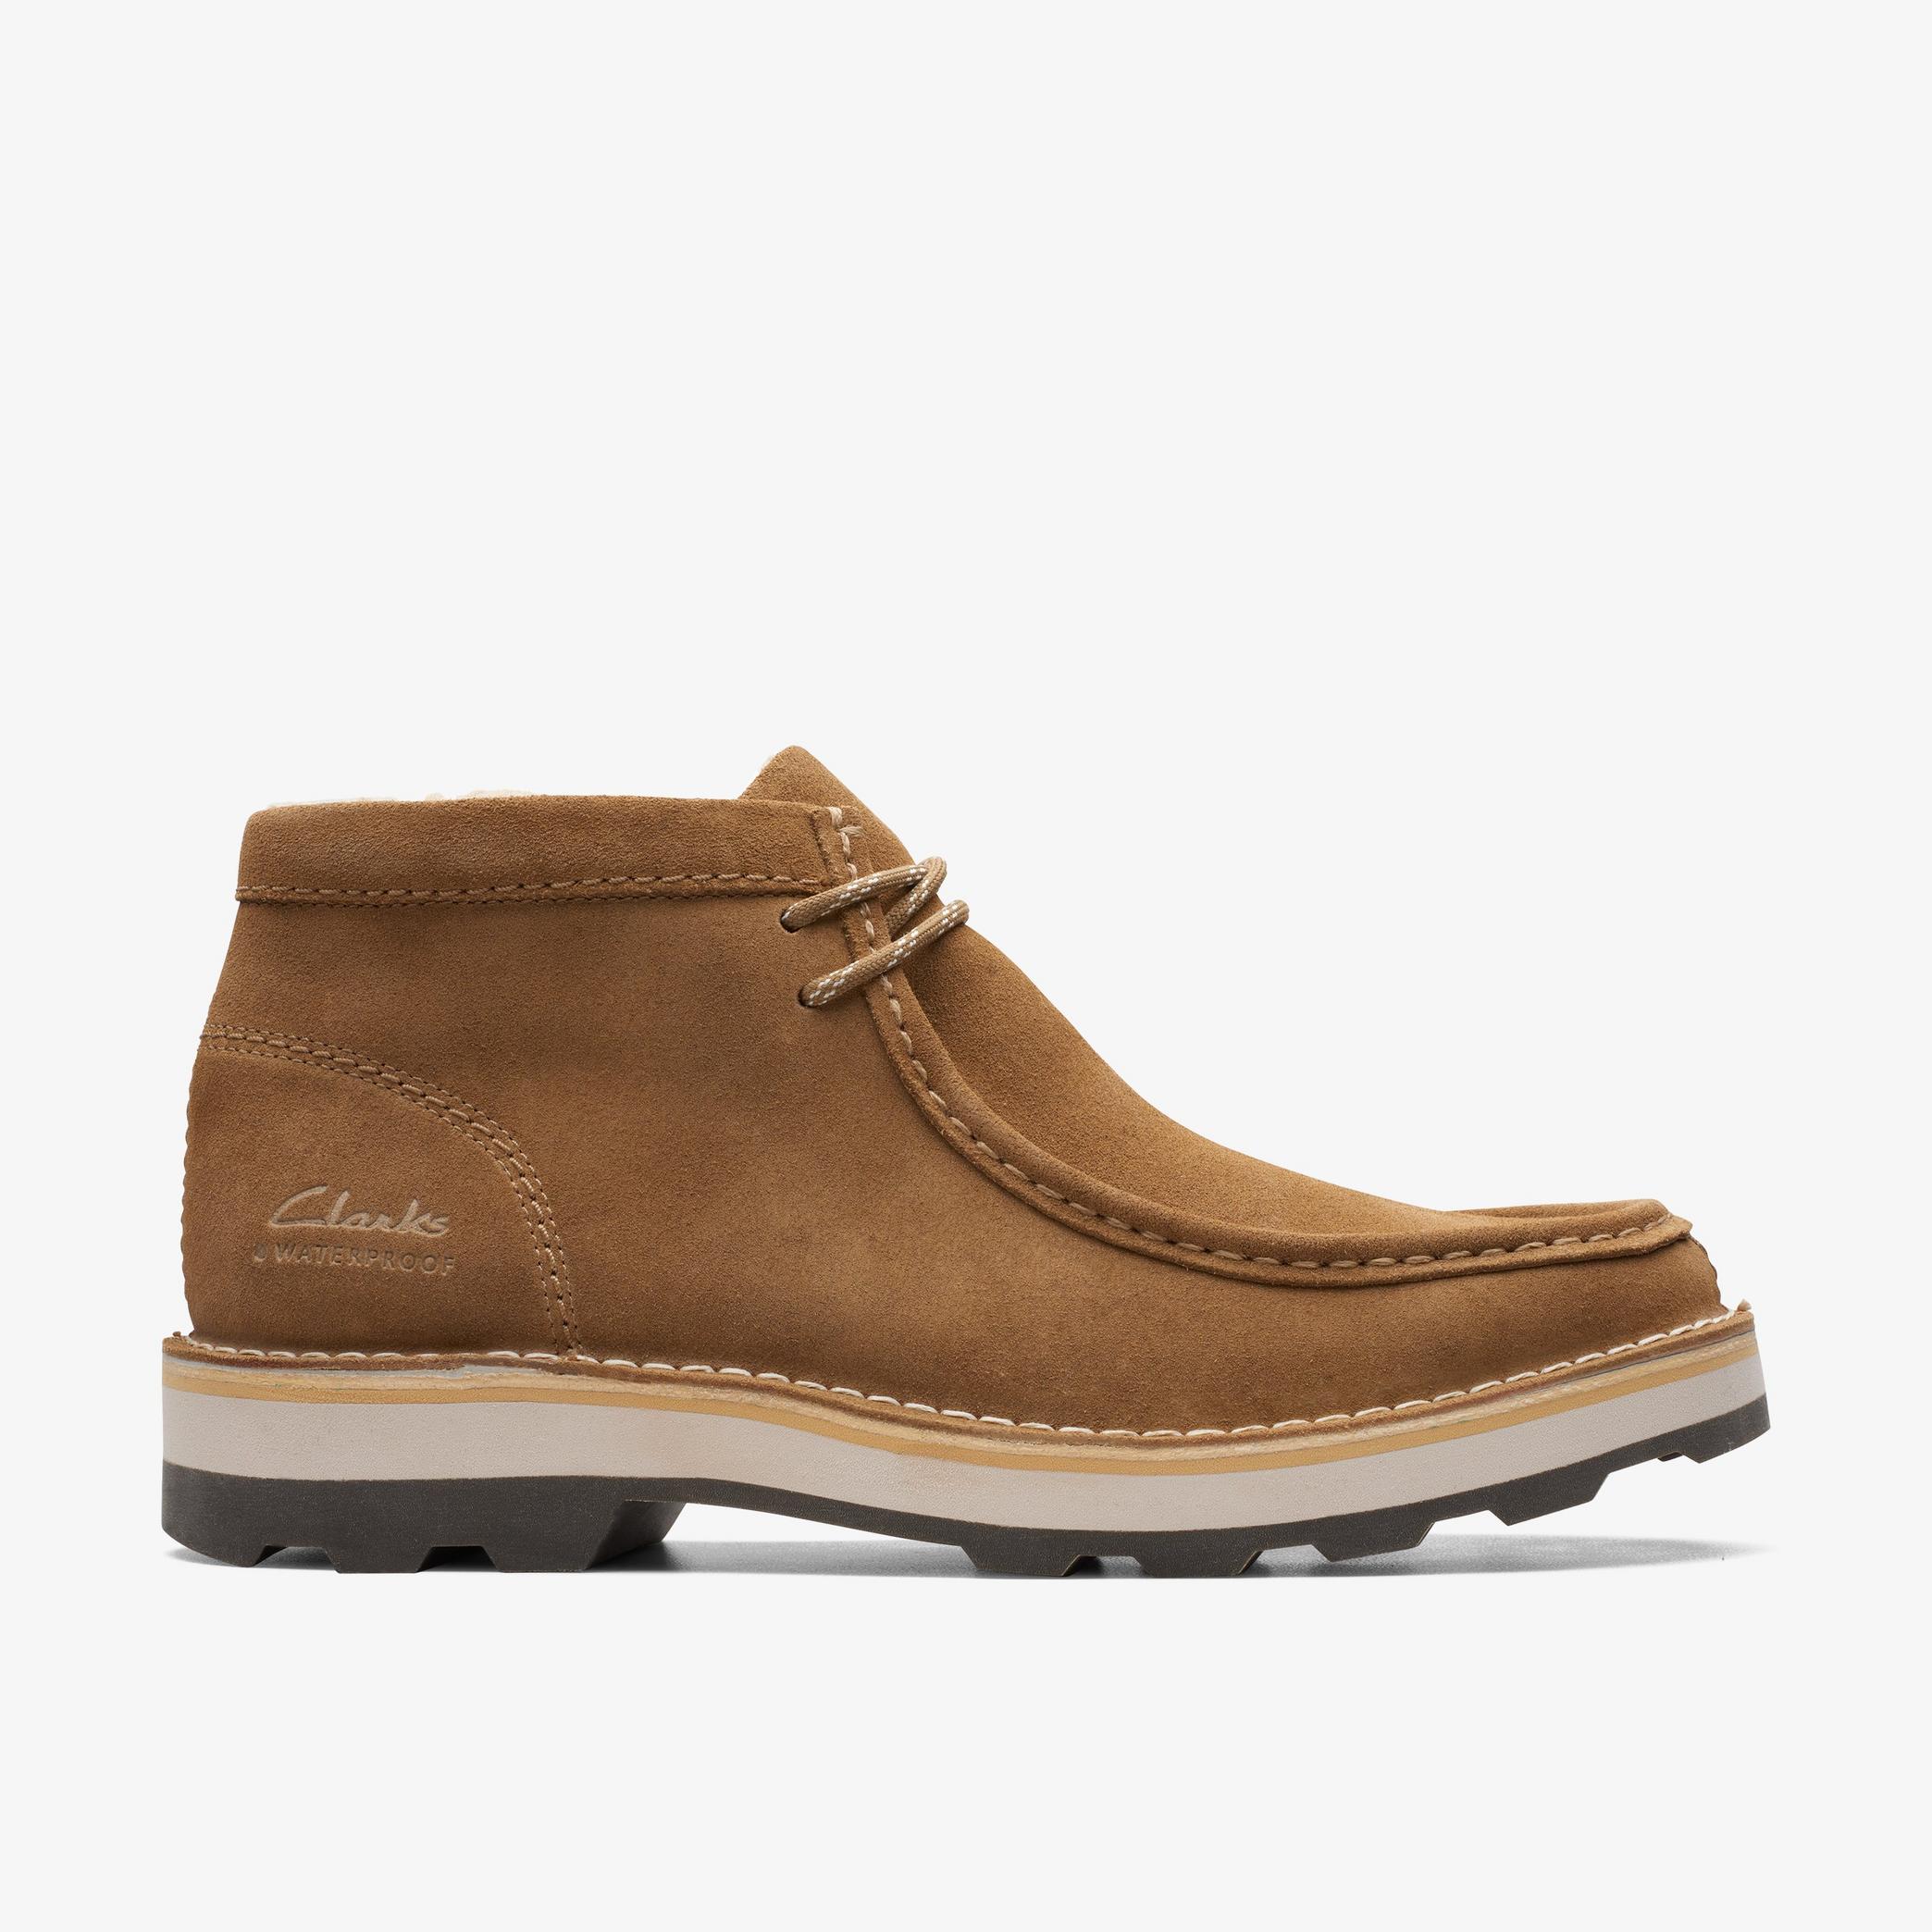 Corston Wally Waterproof Dark Sand Warmlined Ankle Boots, view 1 of 6